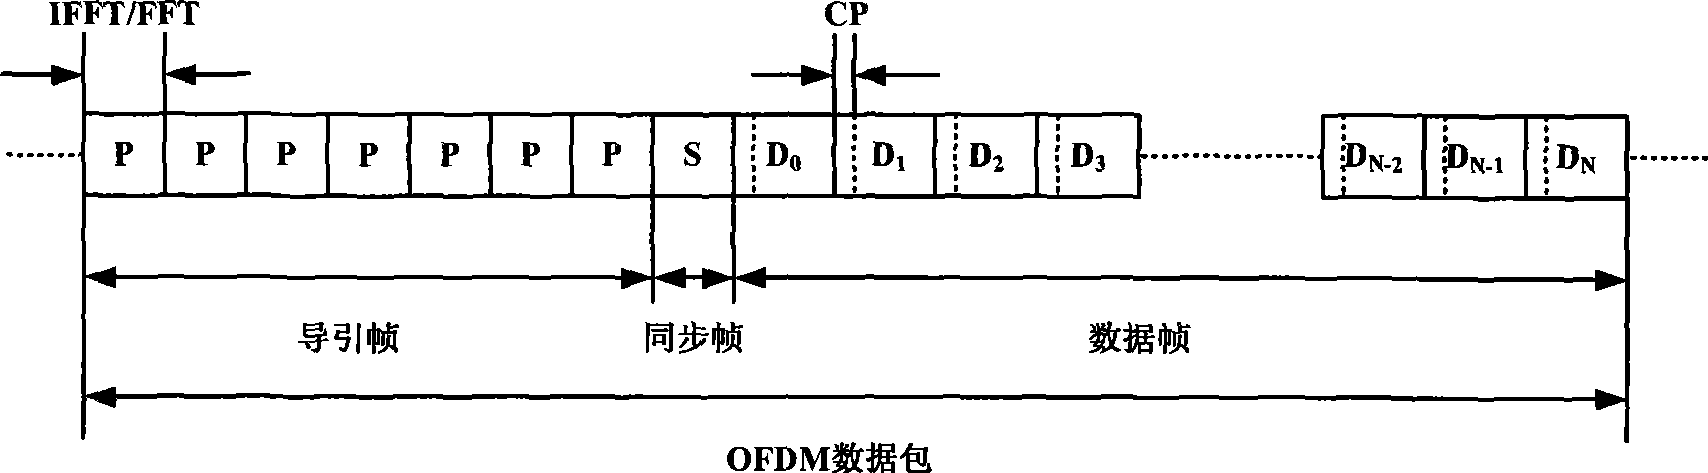 Zero frequency conversion and adaptive frequency selecting power line carrier data transmission method